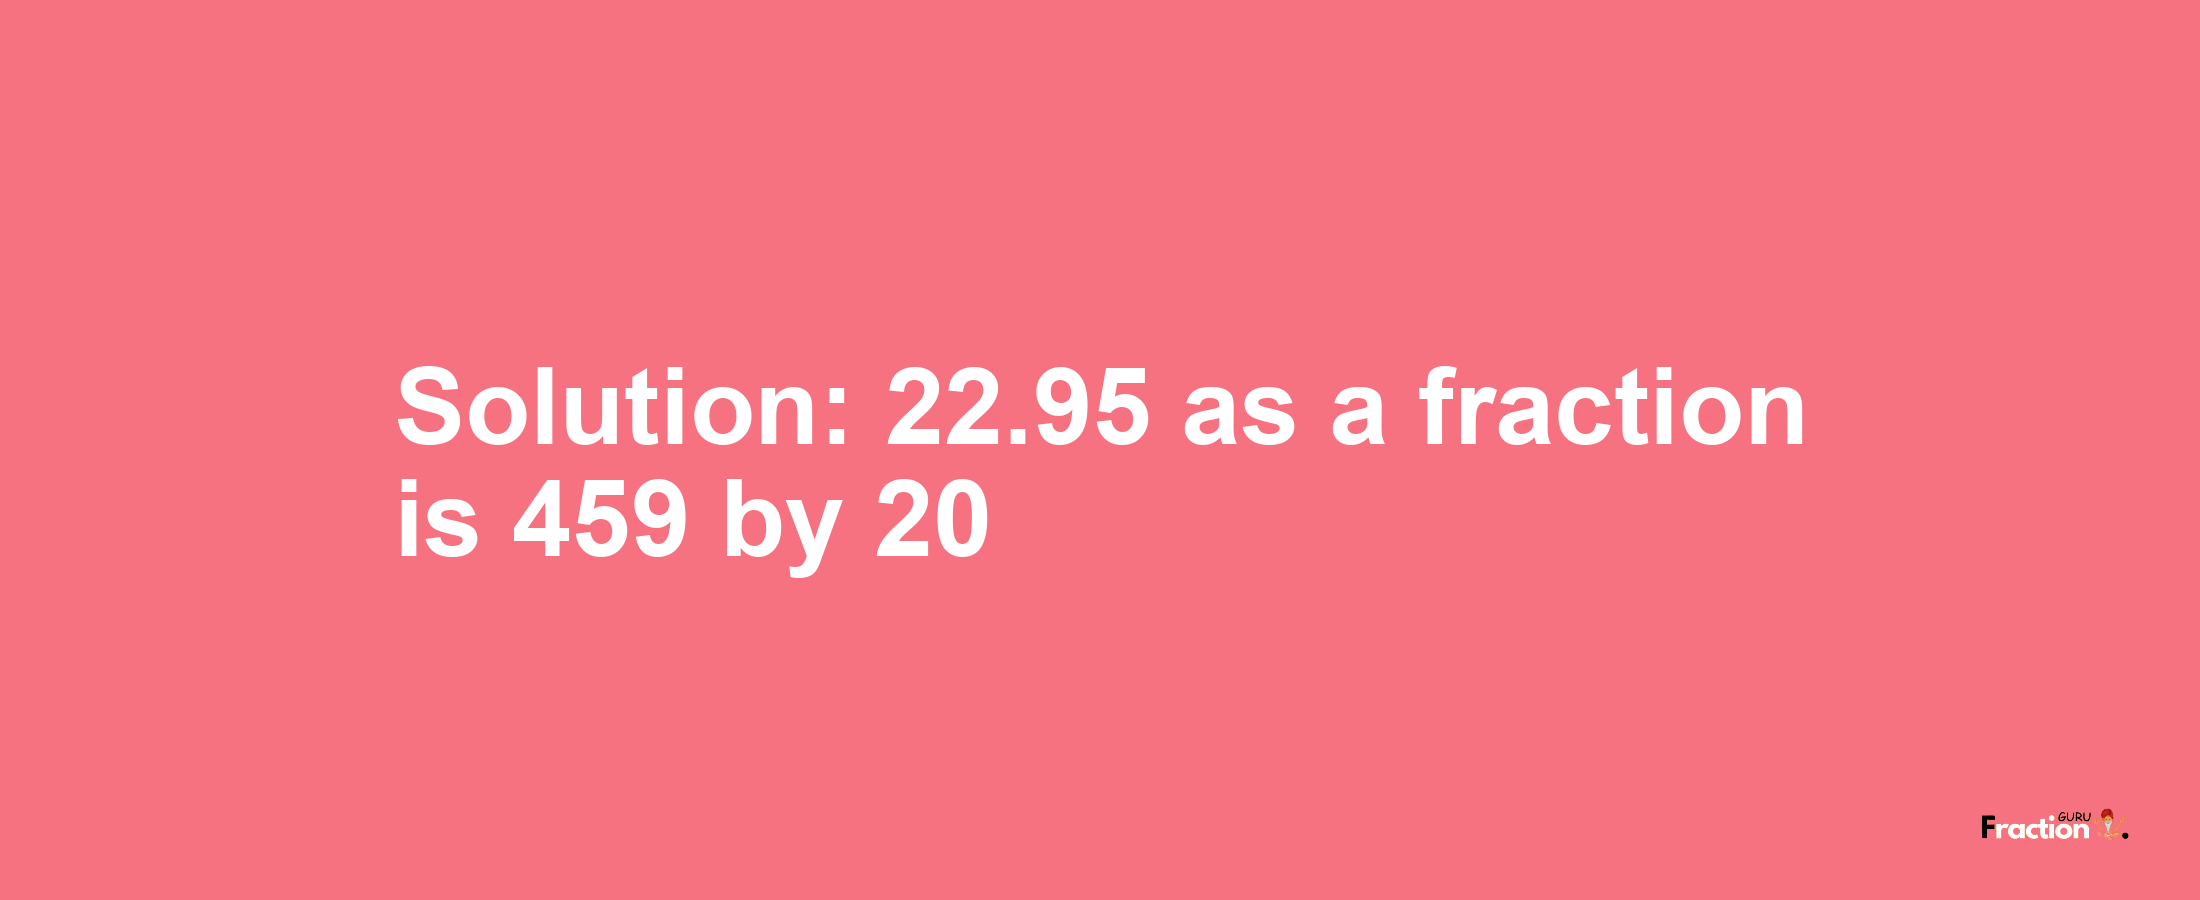 Solution:22.95 as a fraction is 459/20